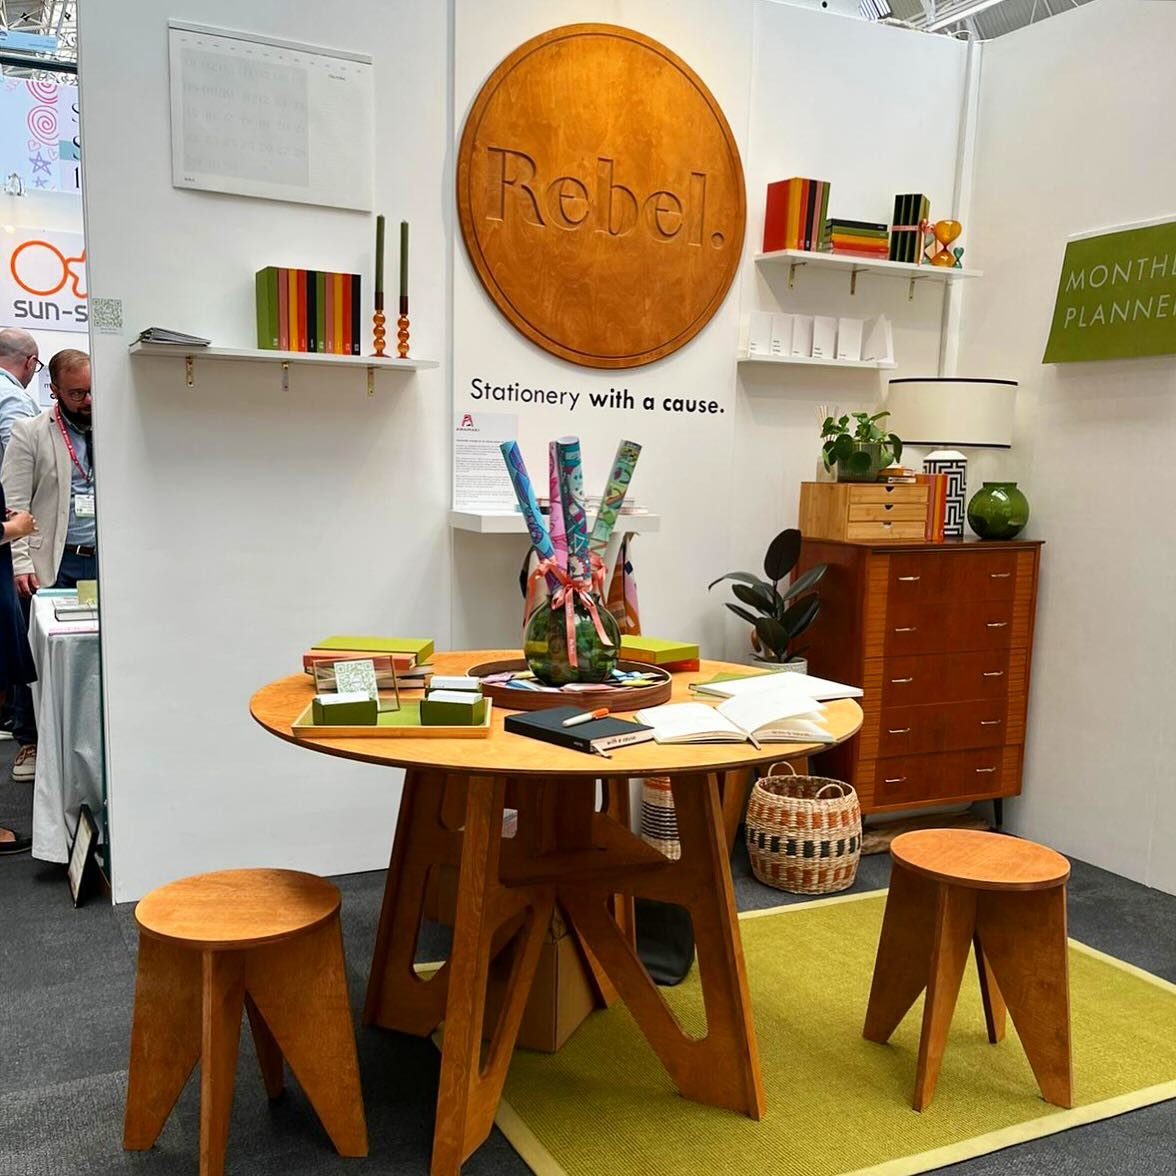 Trade show stand featuring our CNC furniture and signage for the exciting new stationery company @rebelstationery.london #stationerywithacause #cncfurniture #tradeshowstand #furnituredesign #plyfurniture @create_180 @createcnclondon